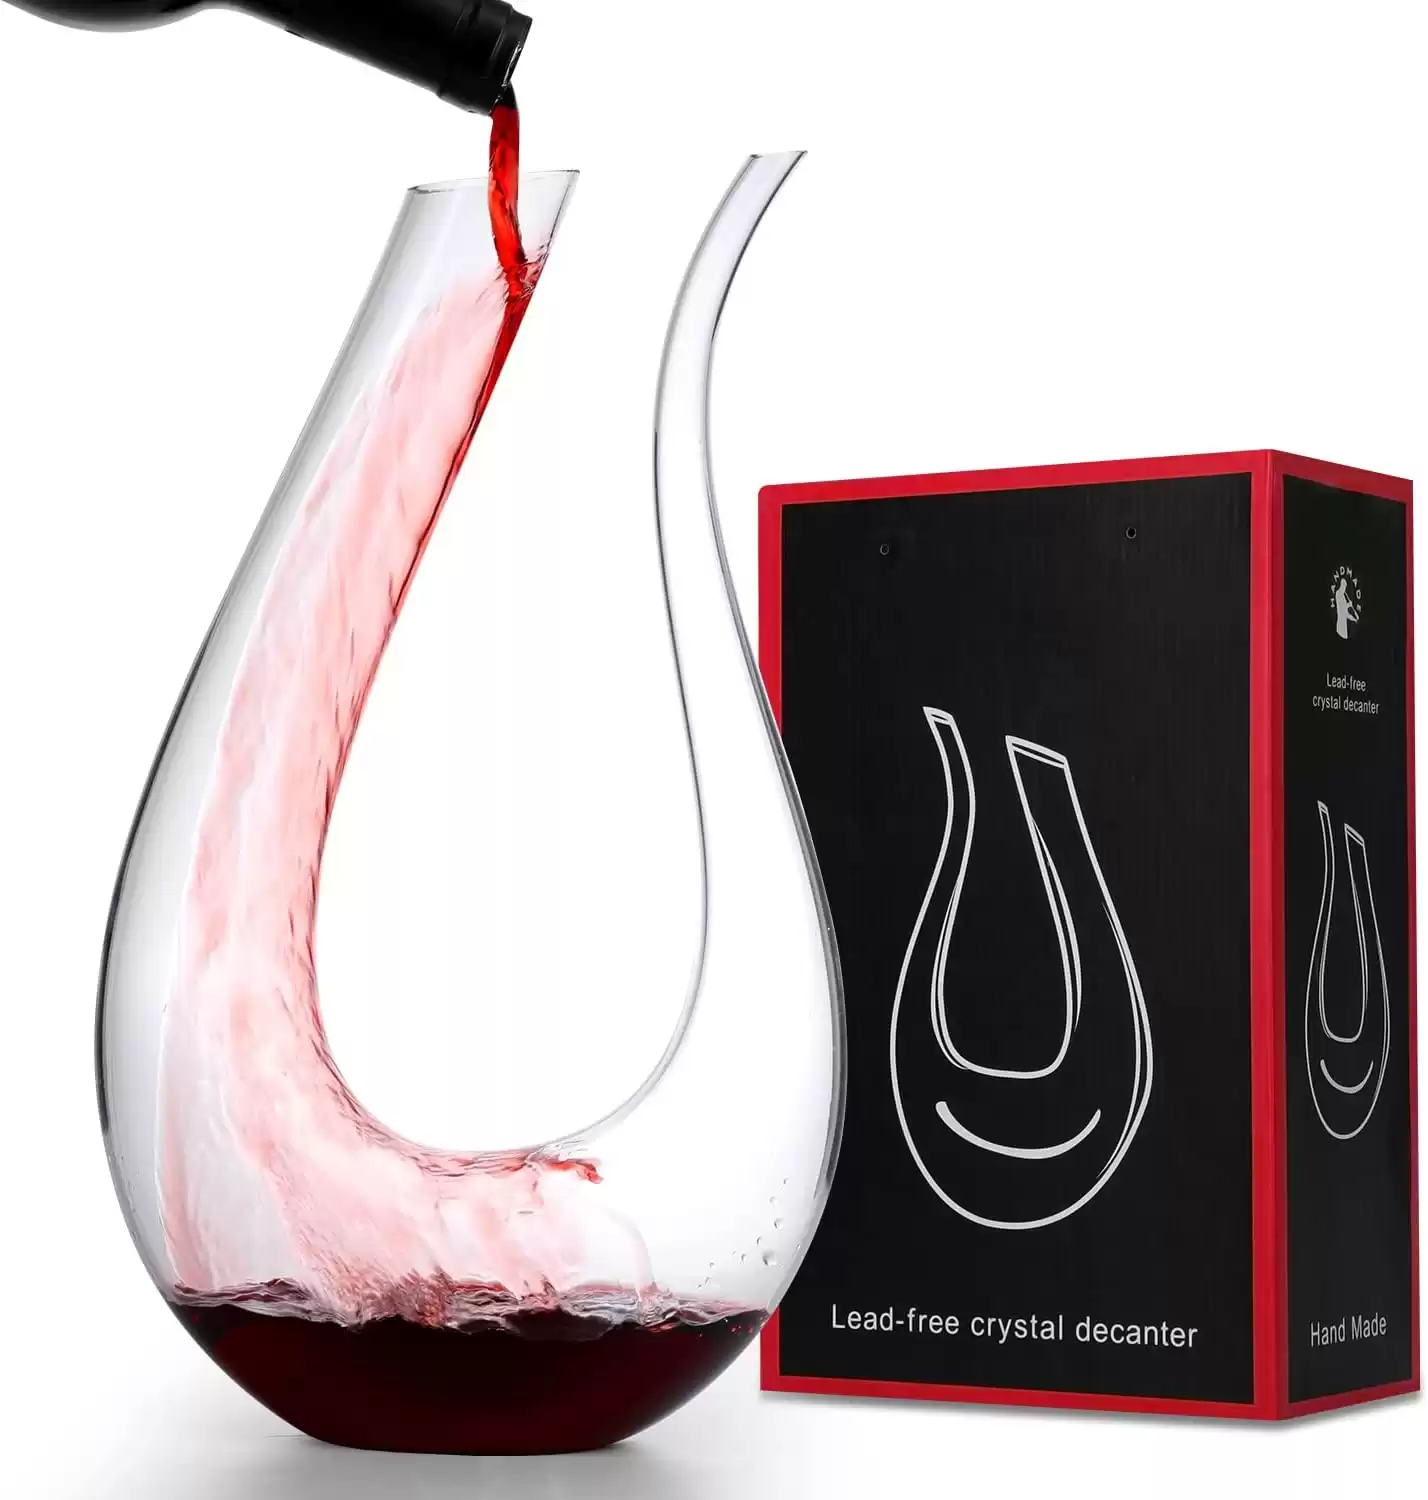 Le Chateau Red Wine Decanter - Hand Blown, Lead-Free Crystal  Glass Decanter and Wine Aerator - Full Bottle (750ml) Wine Decanters and  Carafes - Elegant Wine Carafe, Wine Gifts and